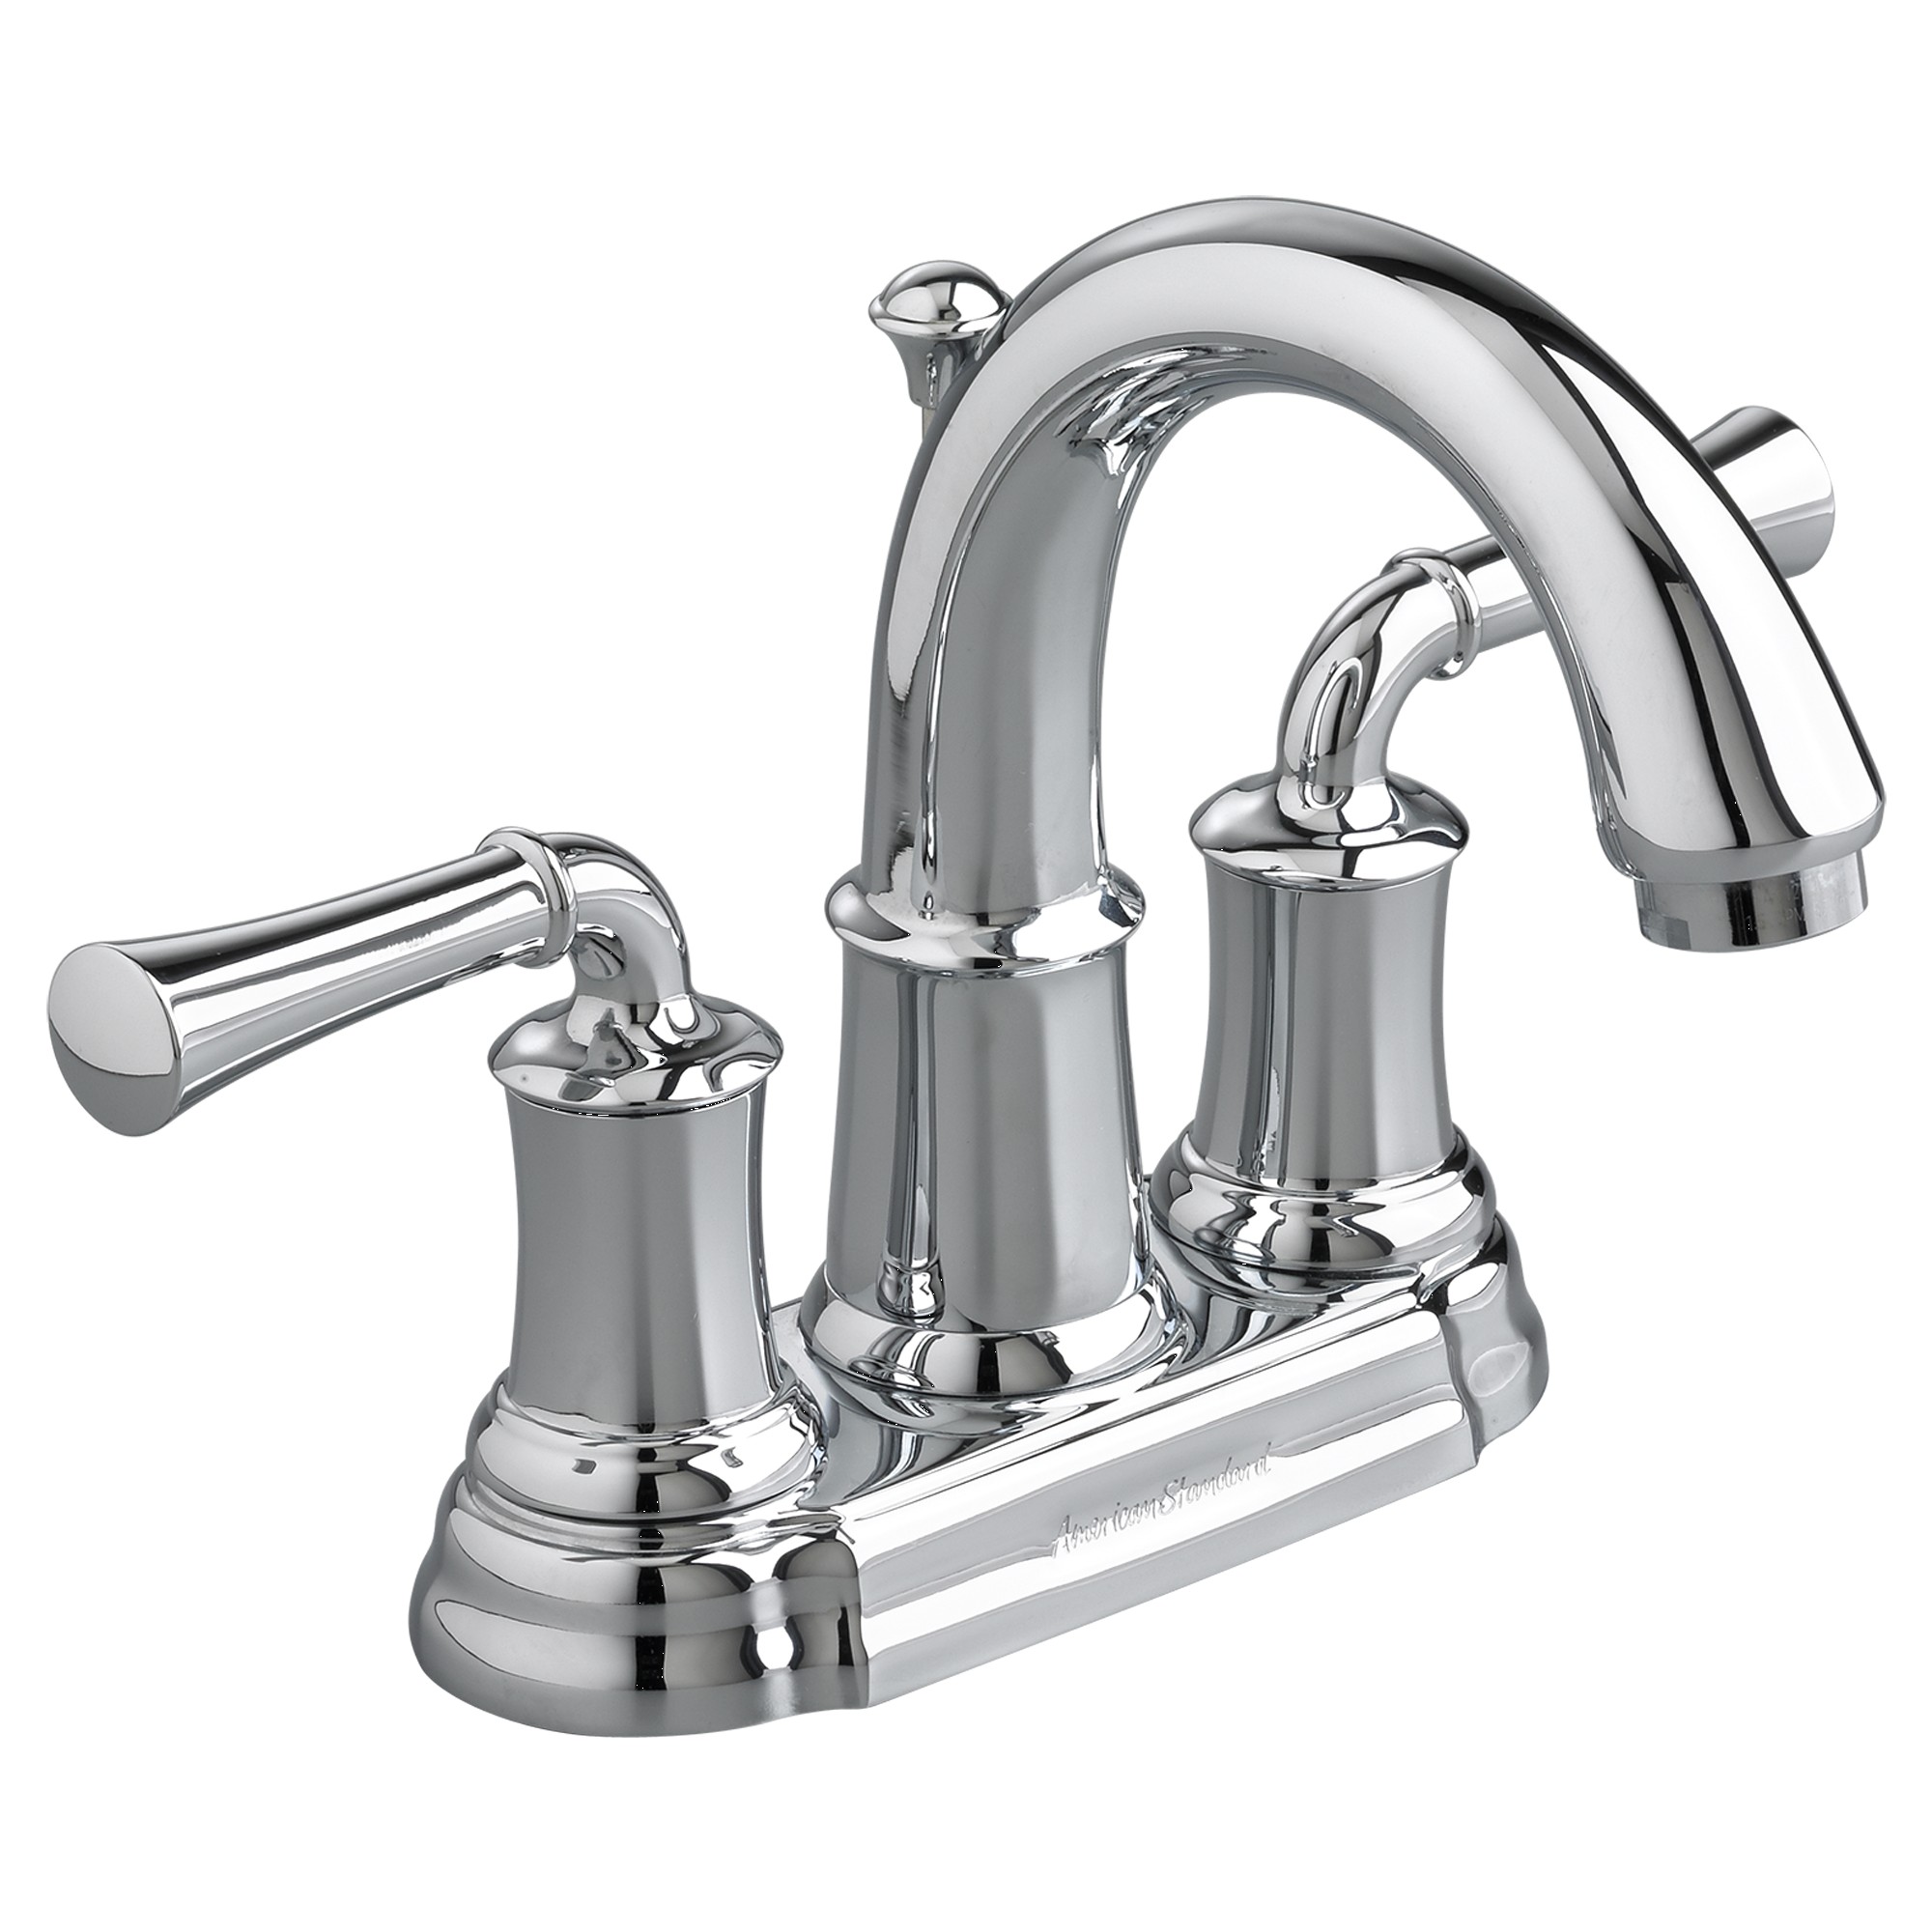 American Standard | 7420.201.002 | AMERICAN STANDARD 7420.201 PORTSMOUTH CENTERSET LAVATORY FAUCET WITH POP-UP DRAIN & LEVER HANDLES CP 002 CHROME